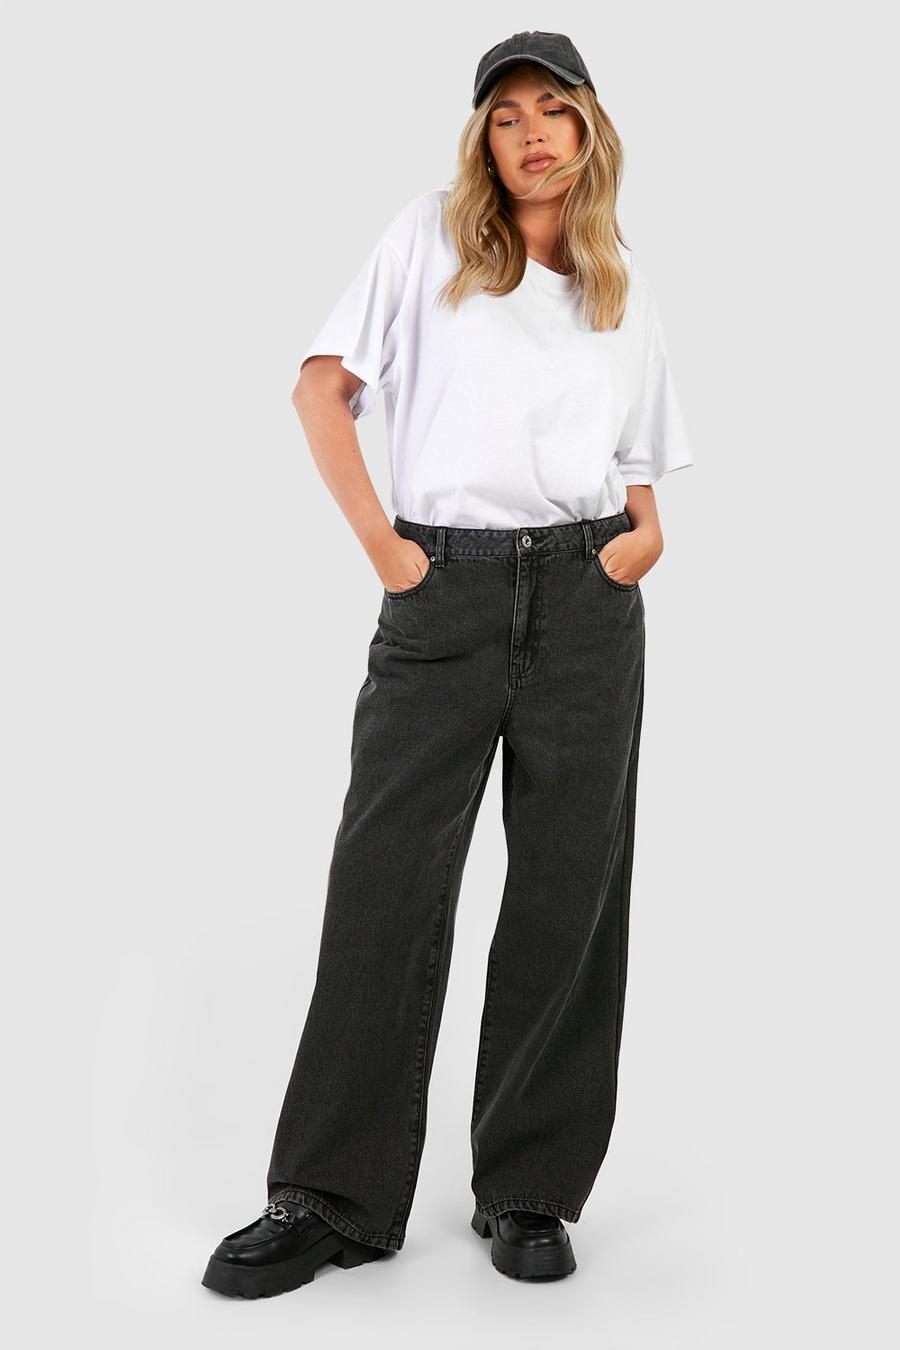 Washed black Plus Comfortable crop jeans Cream you can dress up or wear more casual